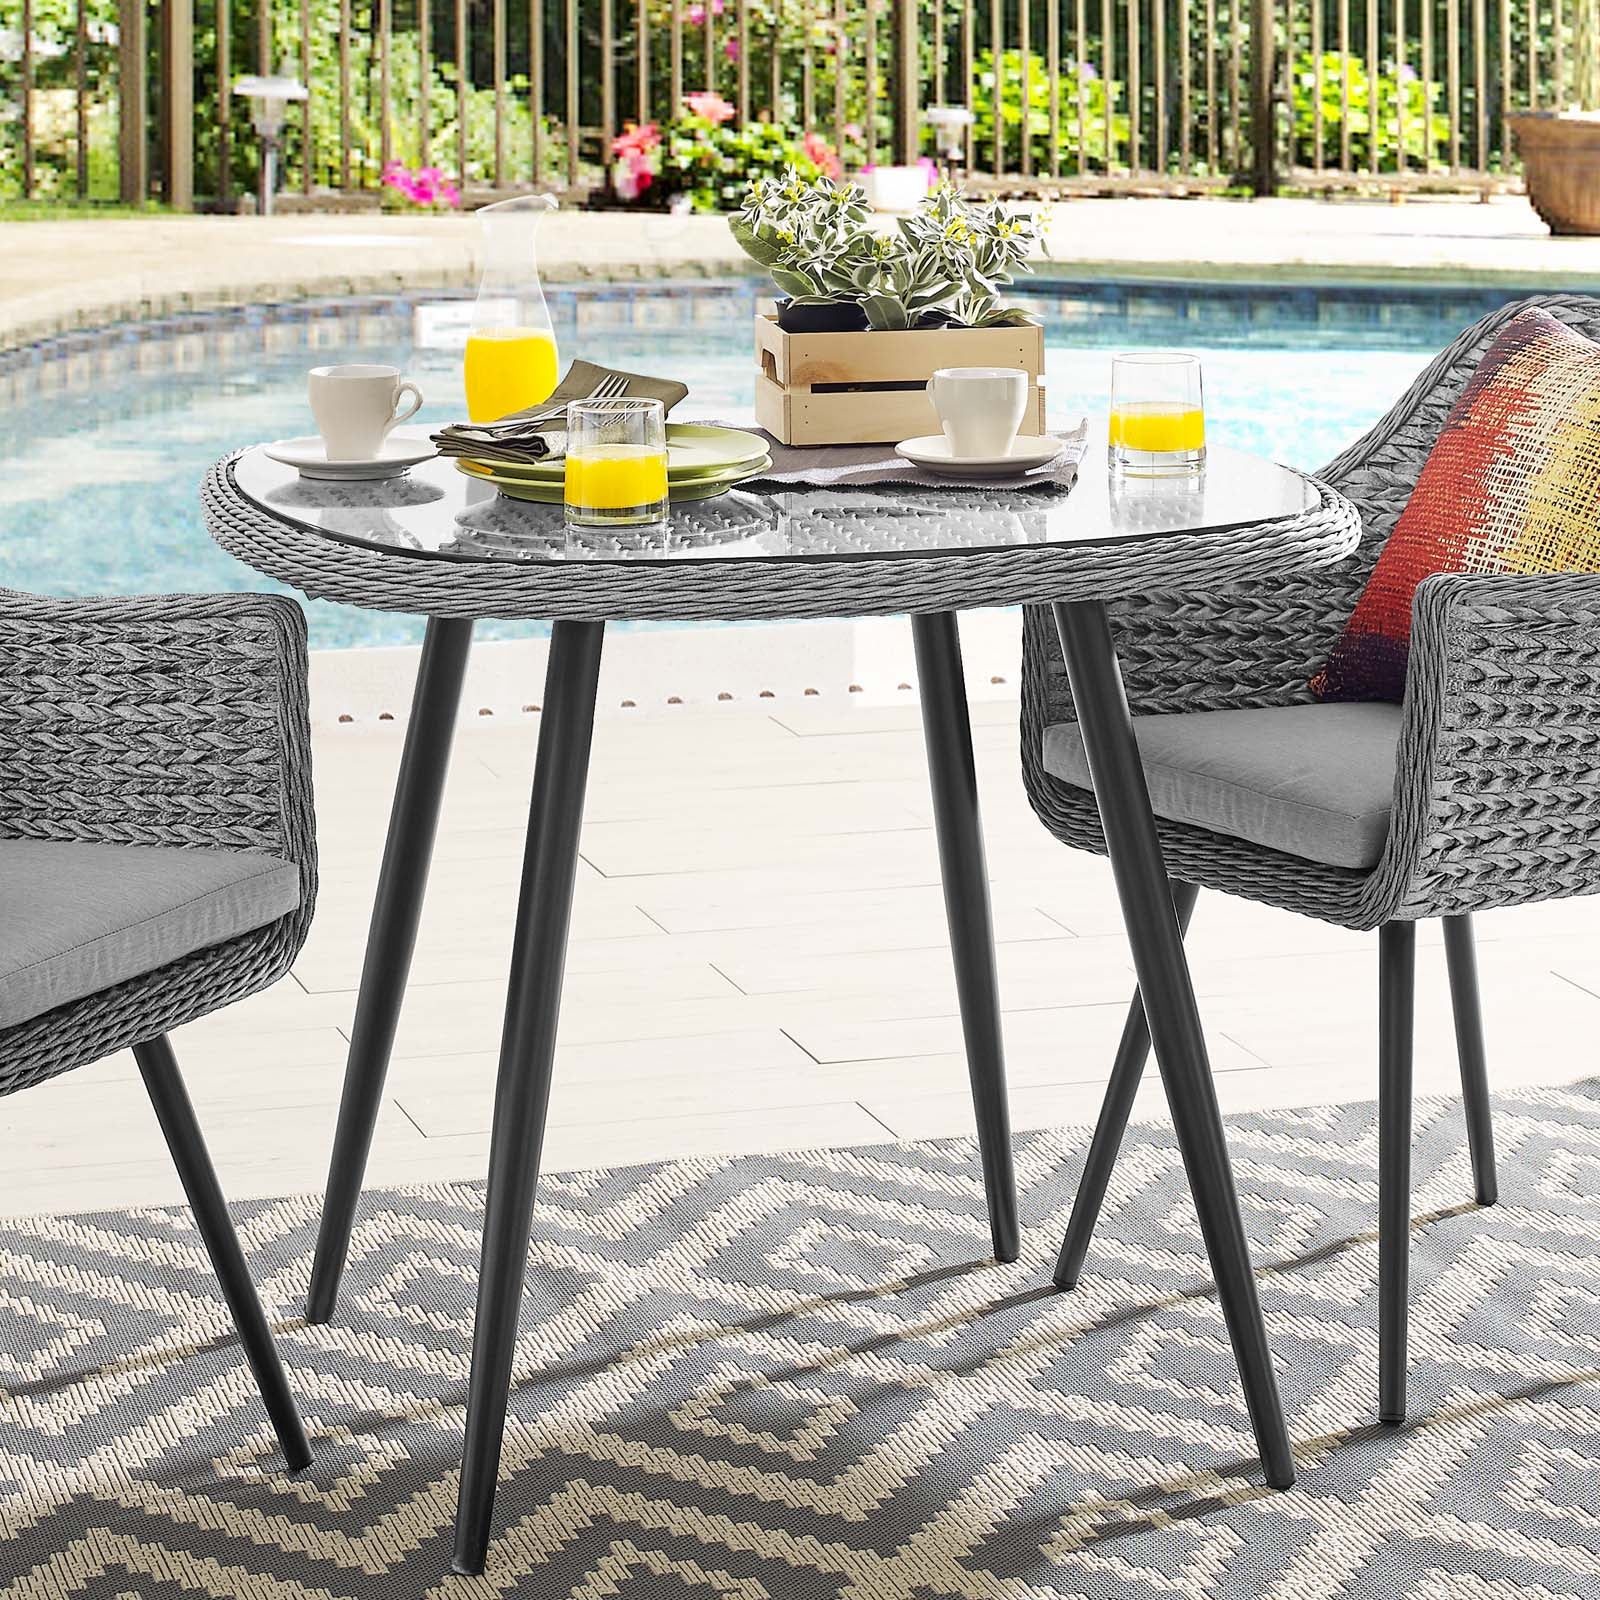 Endeavor 36" Outdoor Patio Wicker Rattan Dining Table - East Shore Modern Home Furnishings